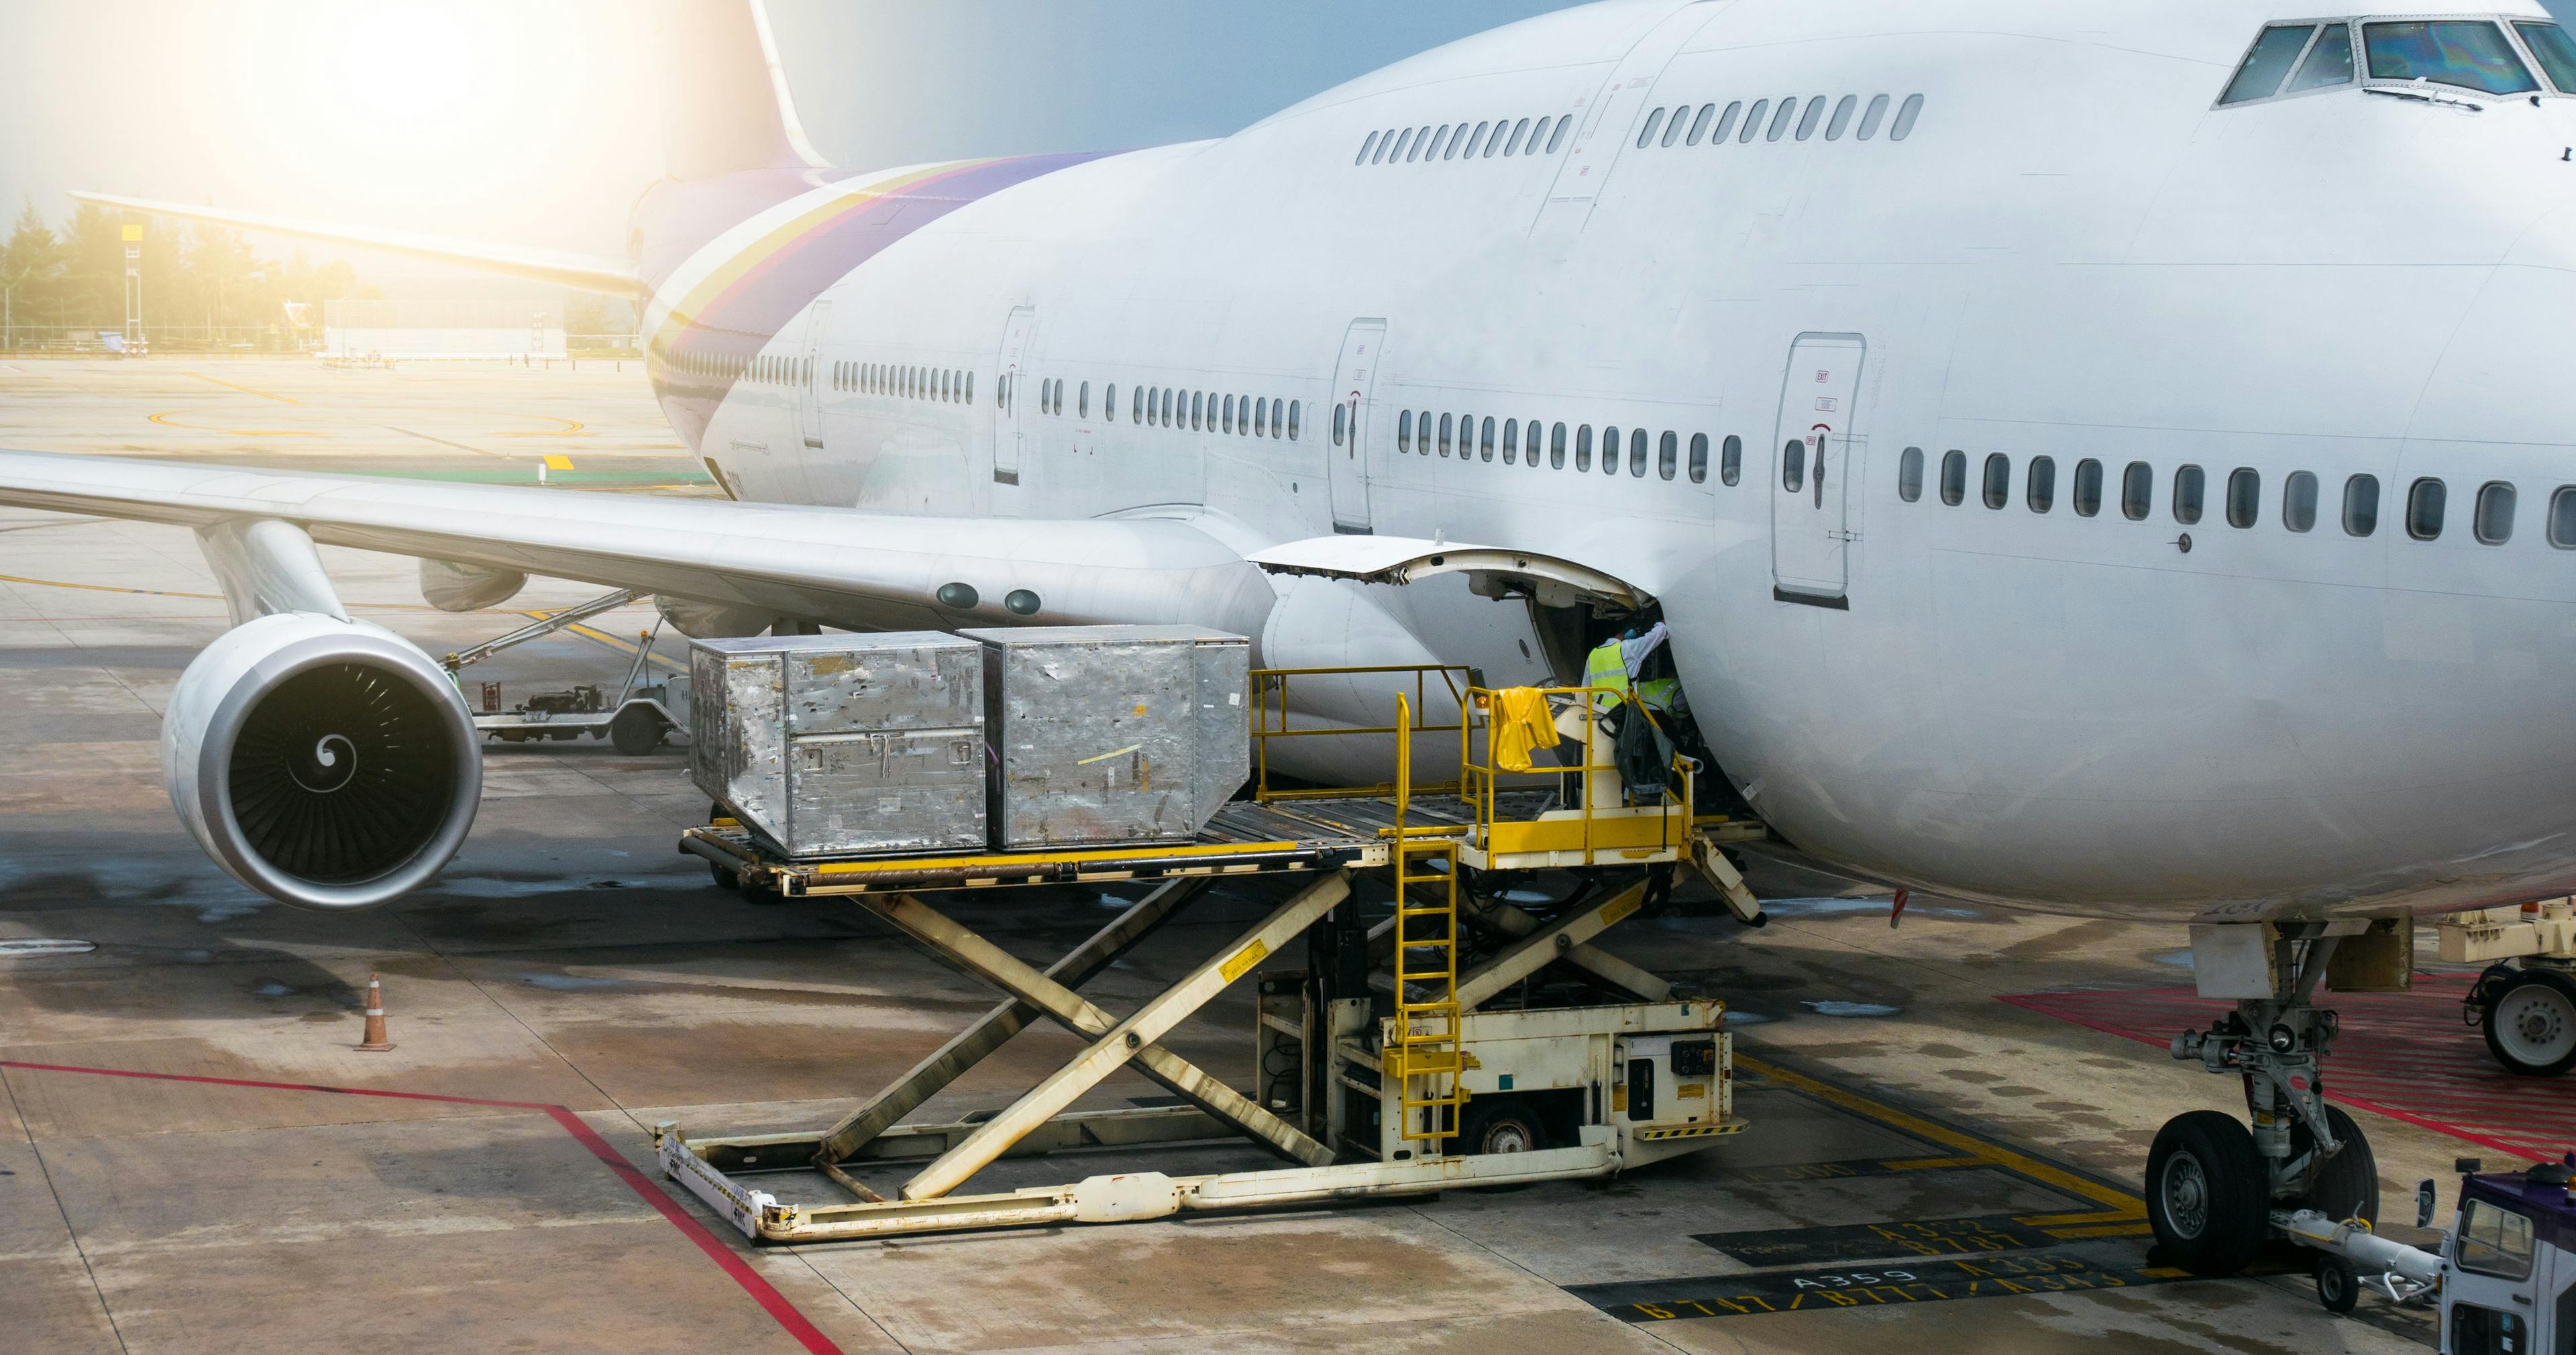 Preparing the aircraft before flight Loading of baggage. Food for flight check-in services and equipment to ready before boarding the airplane. Image Credit: Adobe Stock Images/boophuket